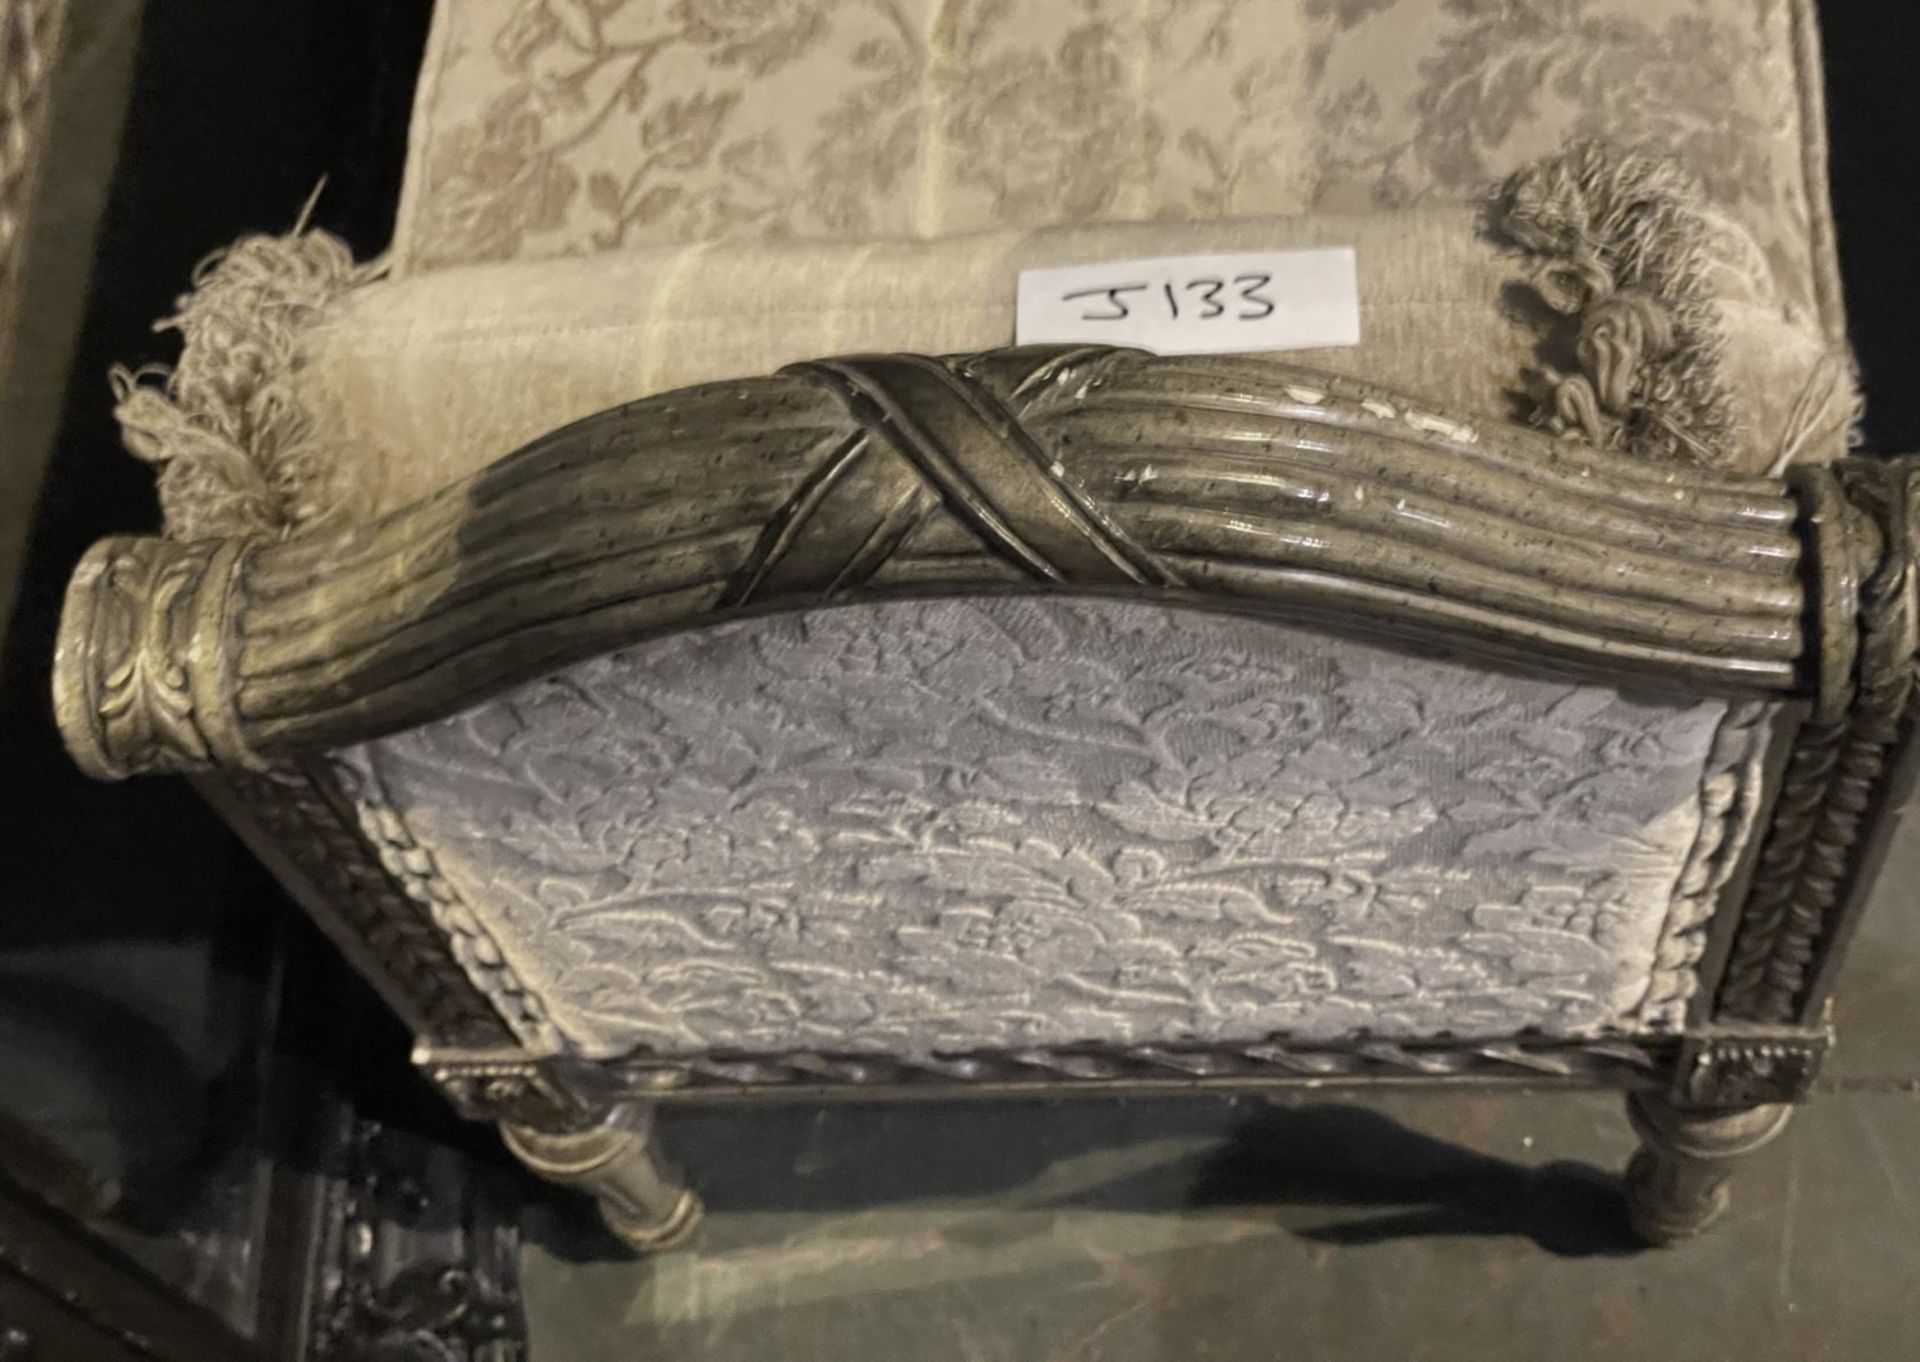 1 x Ornate And Beautifully Covered Chaise Longue With Roll Cushion - Approx 150X50X80Cm - Image 10 of 11